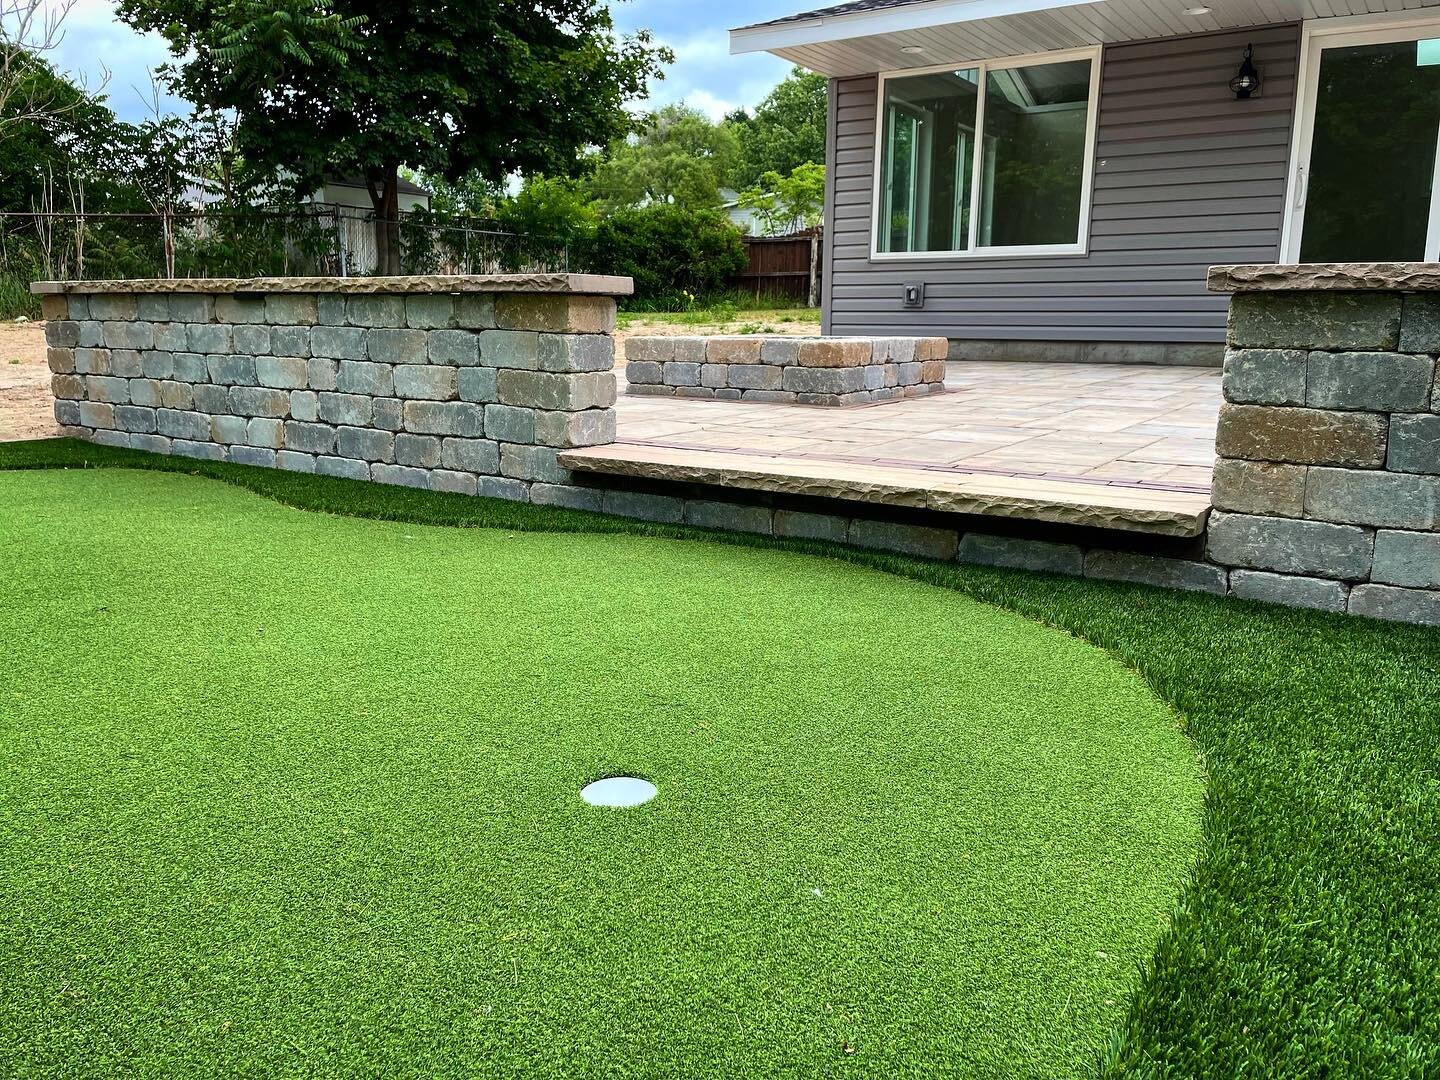 More patio putting green action! I can&rsquo;t get enough of this one!

On this patio, we used Olde Quarry blocks for a timeless look. Paired with Beacon Hill pavers with a Mattoni accent. All materials by 
@unilock